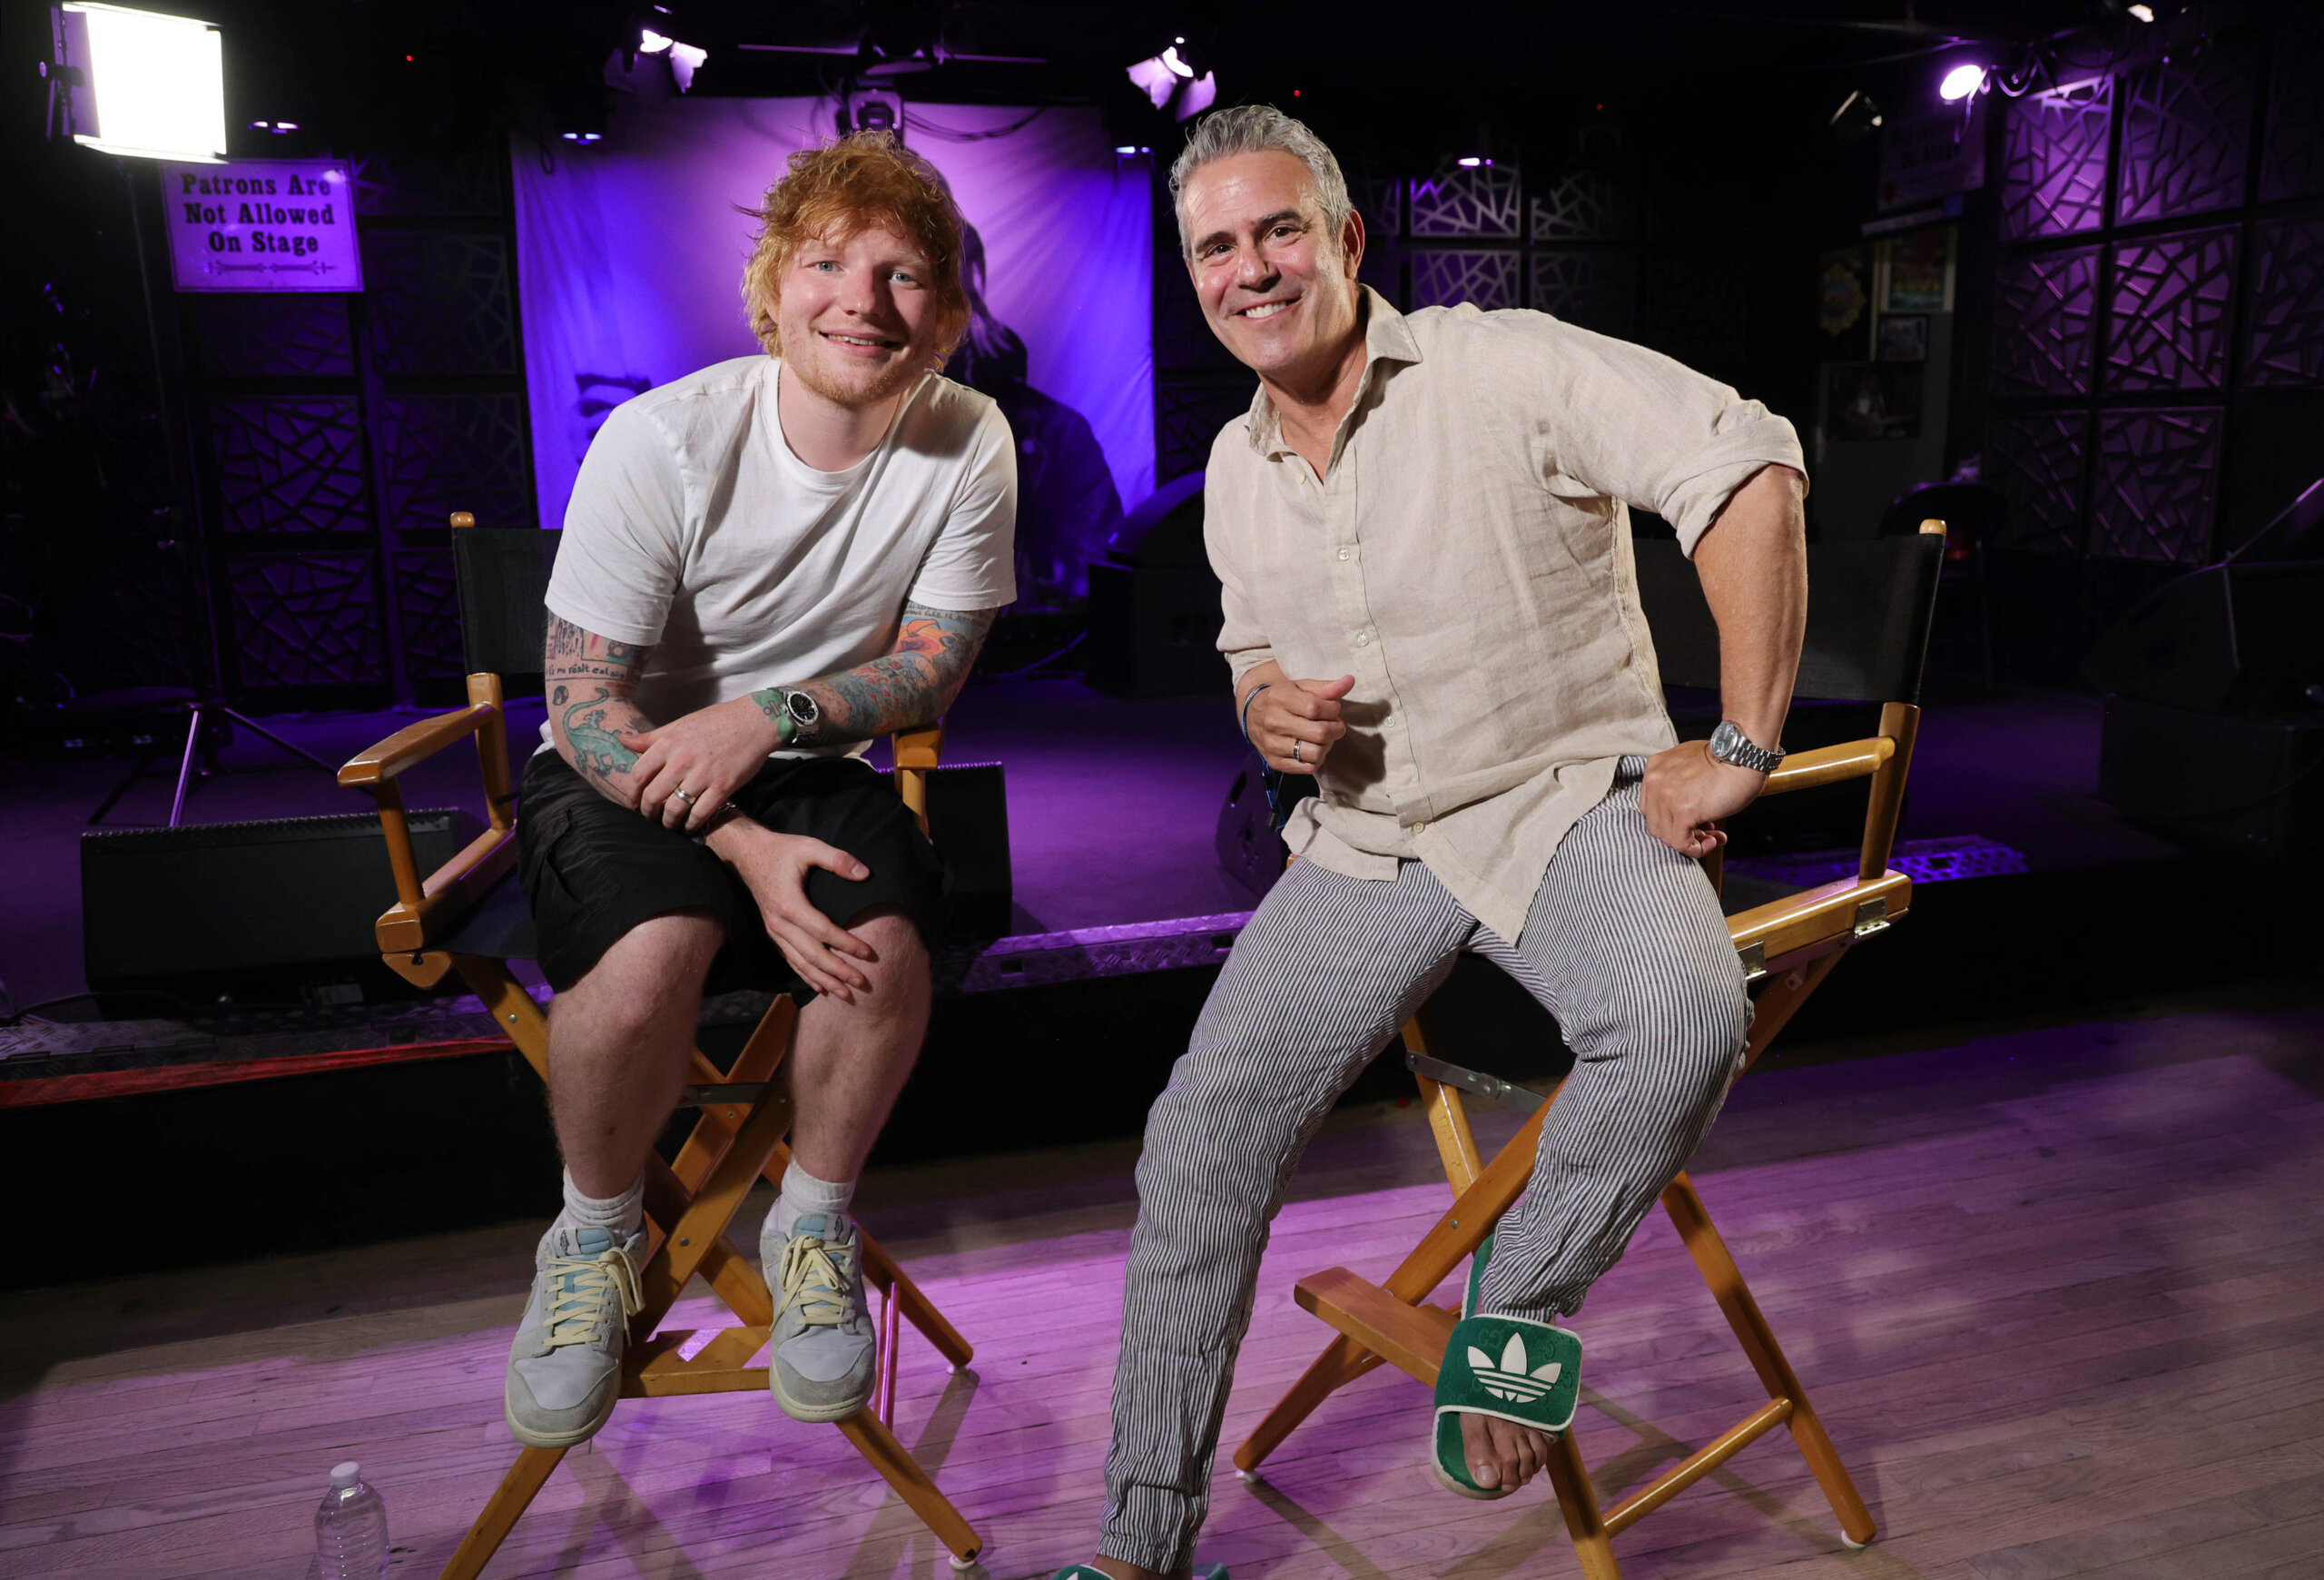 Ed Sheeran and Andy Cohen attend as Ed Sheeran performs live for SiriusXM at the Stephen Talkhouse